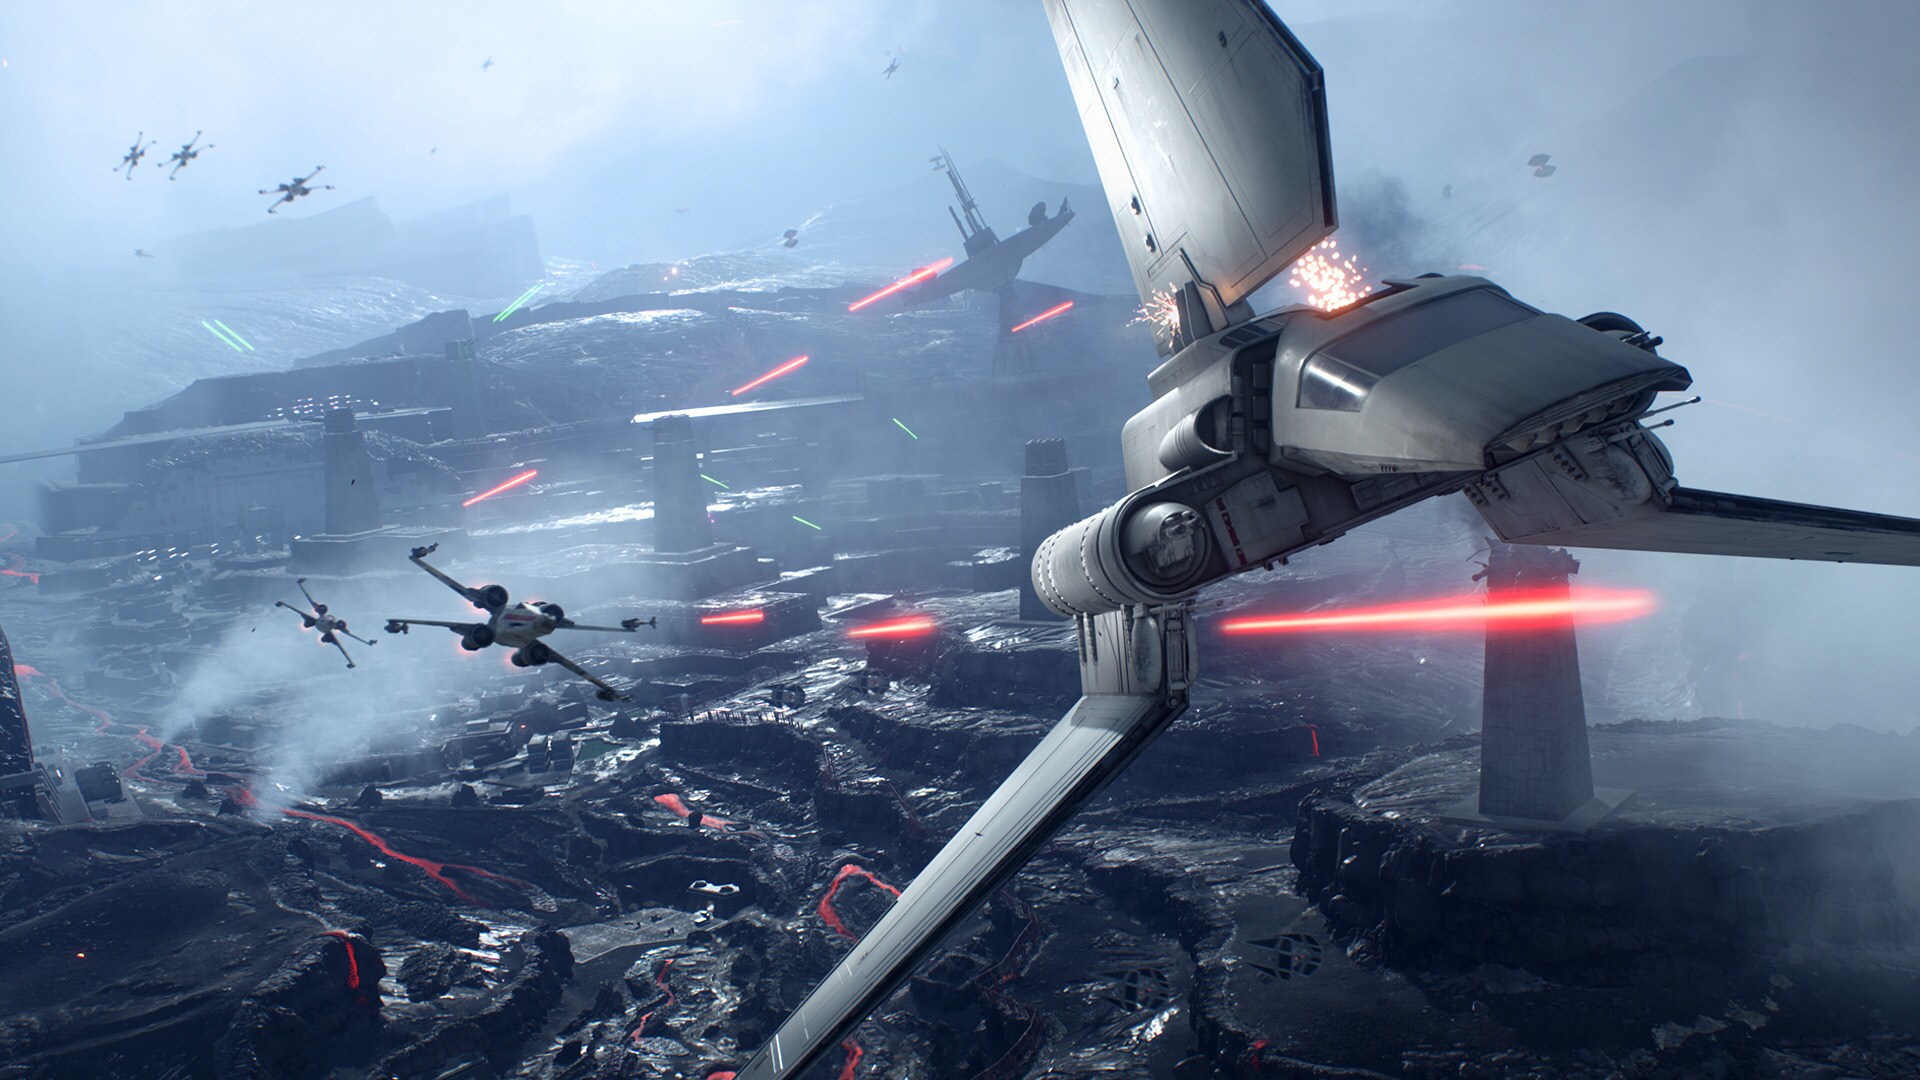 World Building: Doug Chiang on Creating Sullust for Star Wars Battlefront - Exclusive Interview